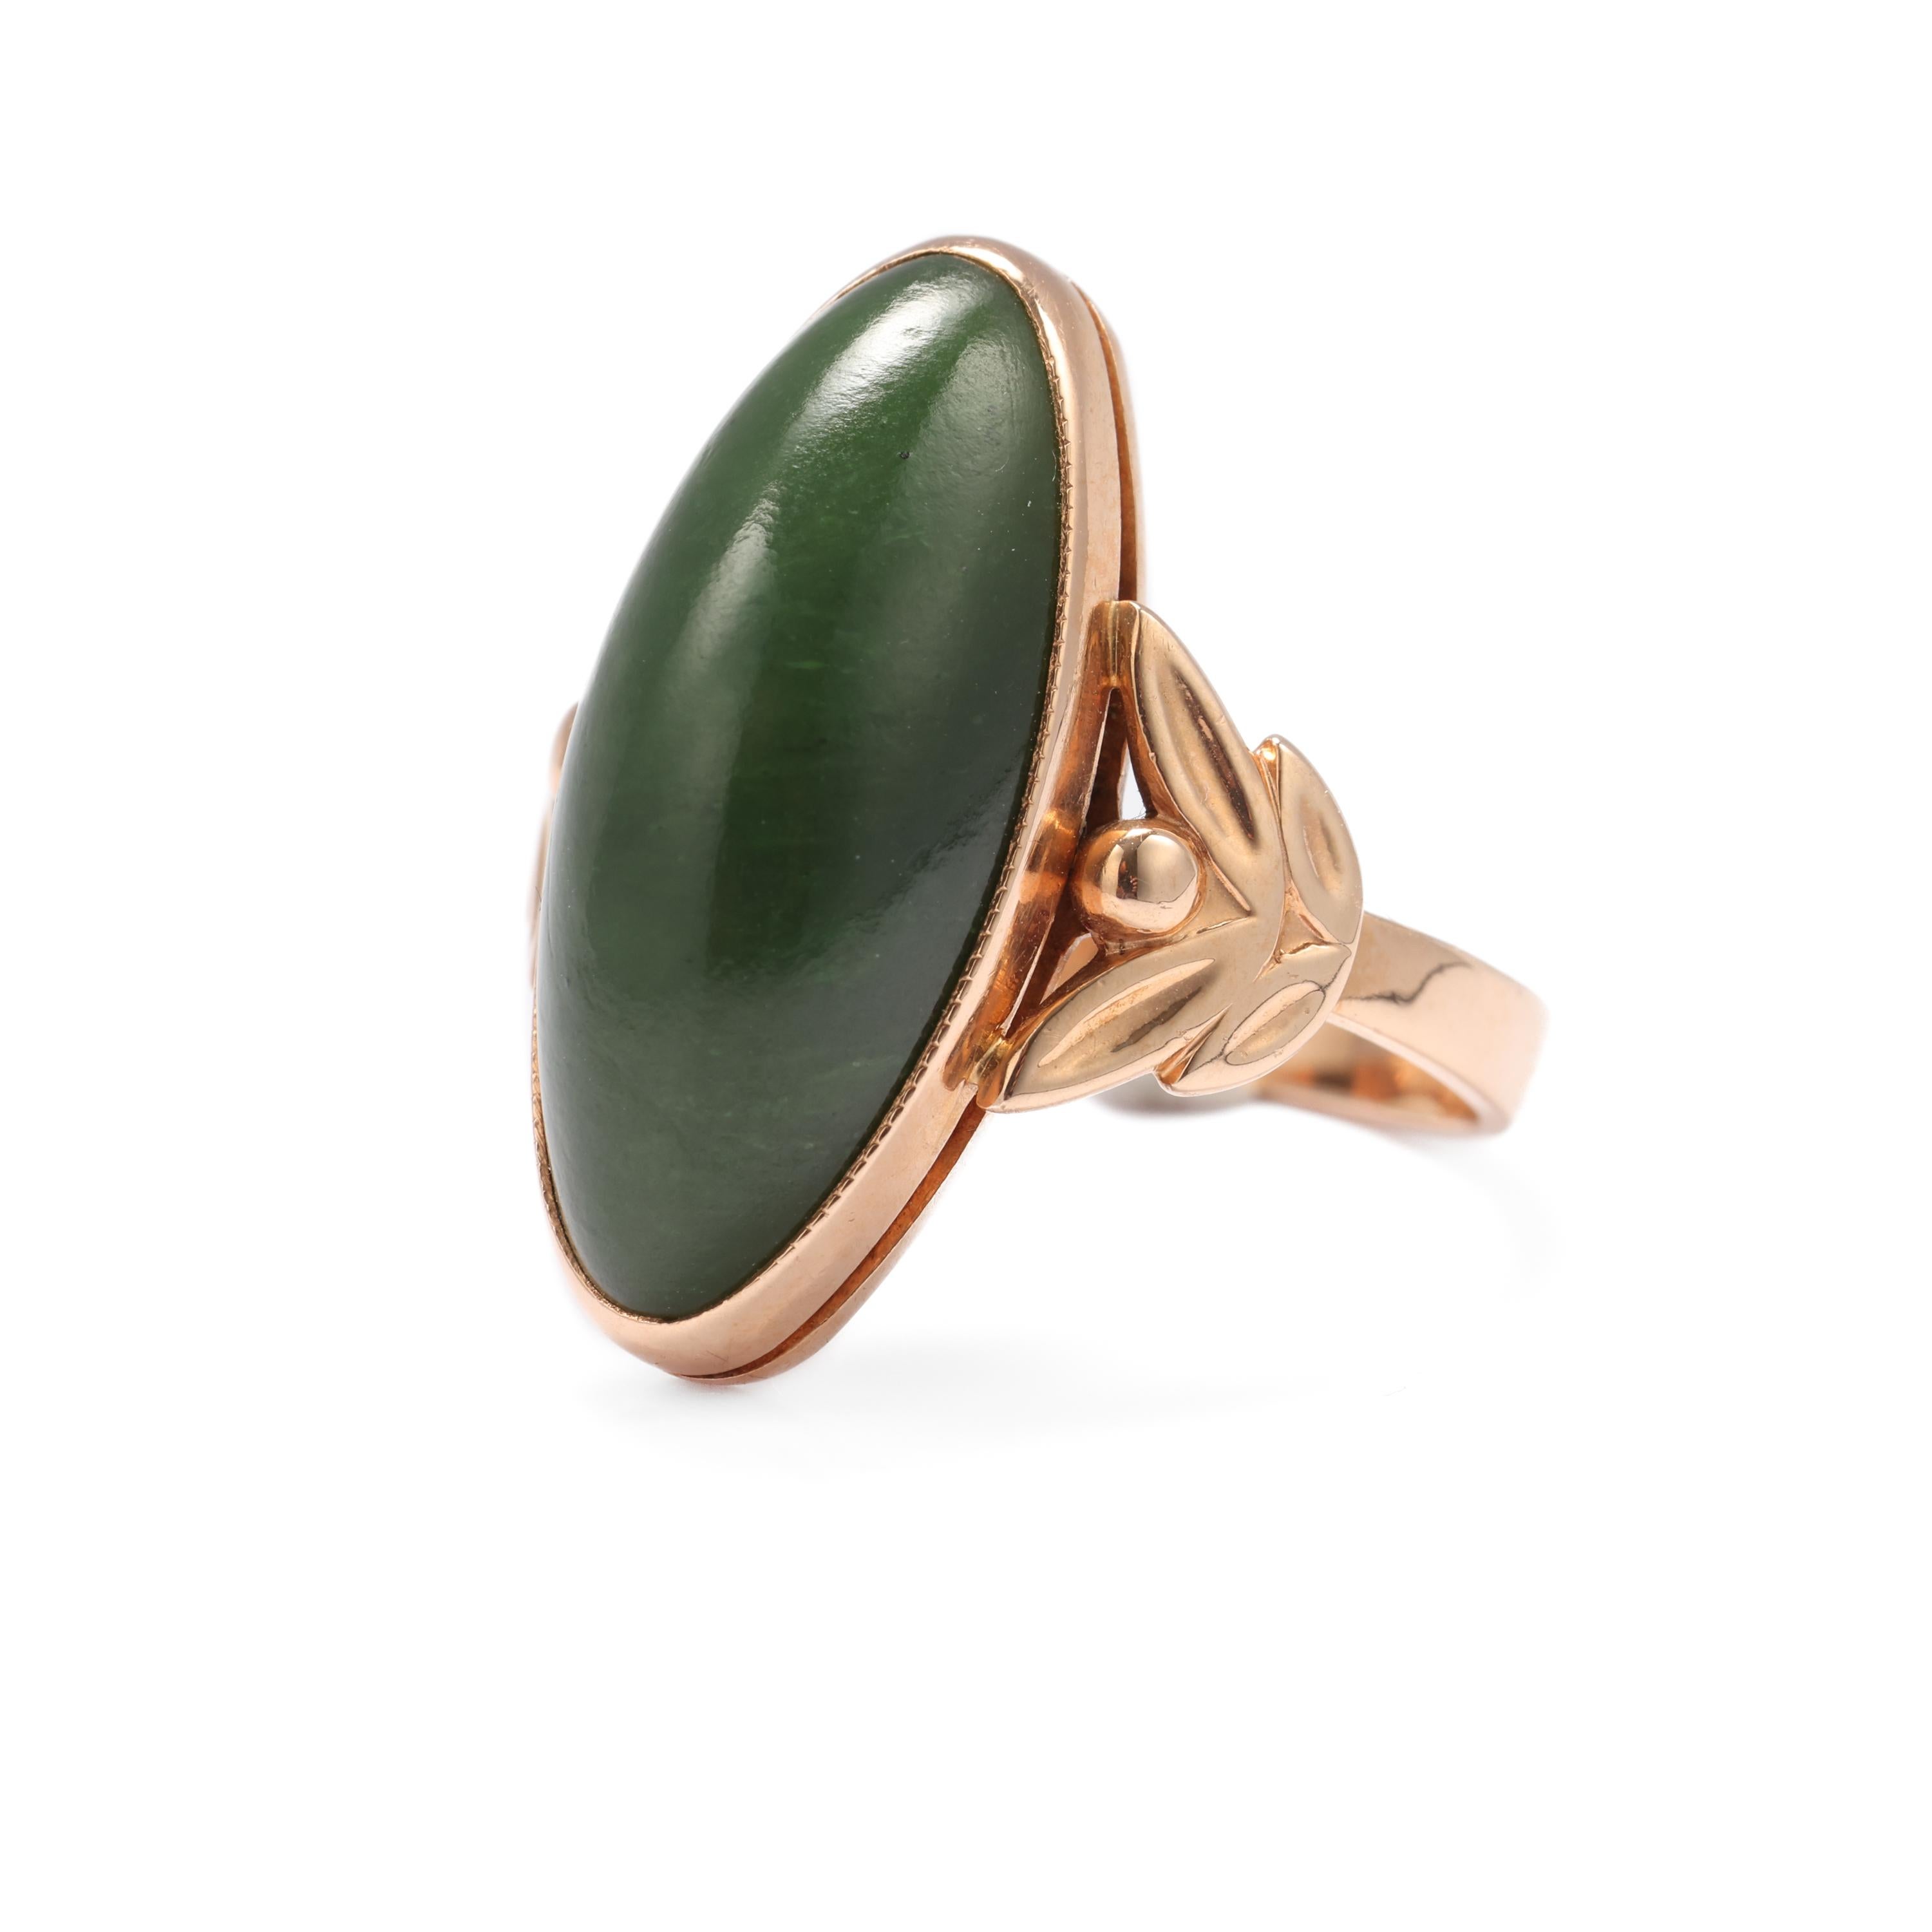 Women's Nephrite Ring in Rose Gold Art Nouveau Style